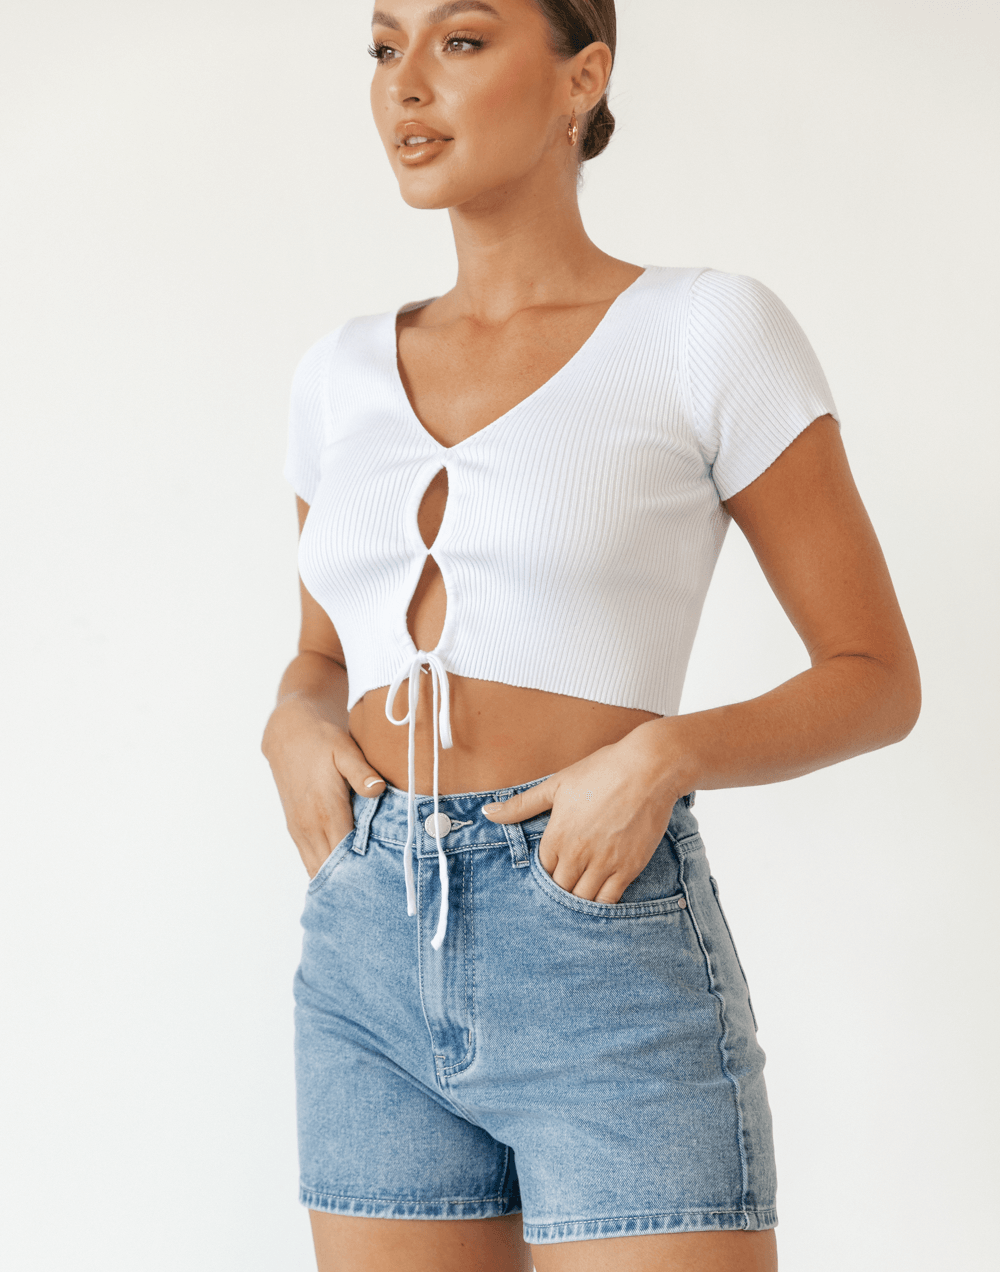 Barna Knit Crop Top (White) - Knitted White Crop Top - Women's Top - Charcoal Clothing